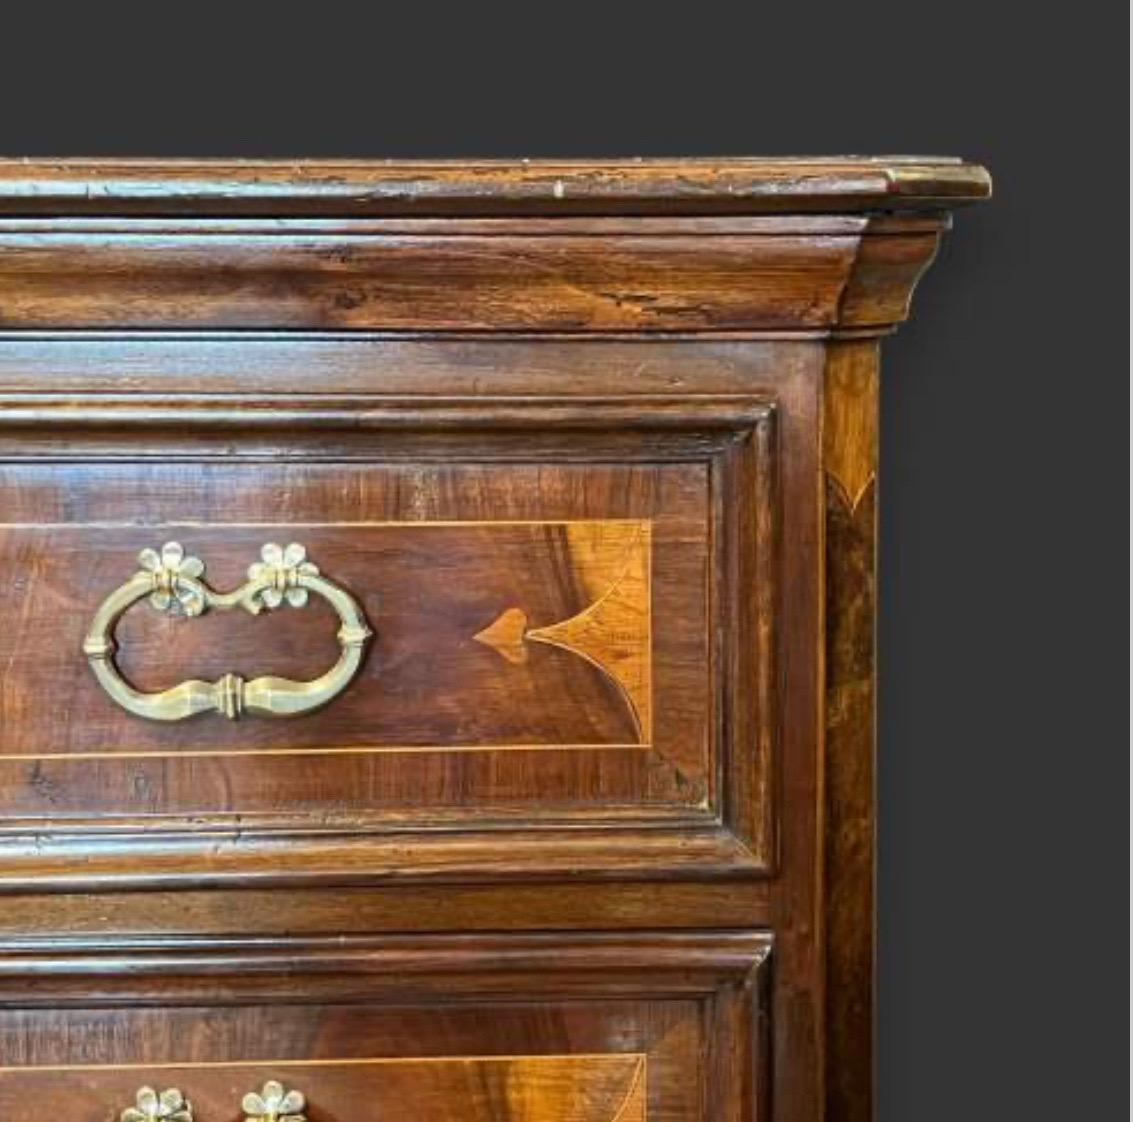  A Large 18th Century Northern Italian Chest of Drawers  In Excellent Condition For Sale In London, GB